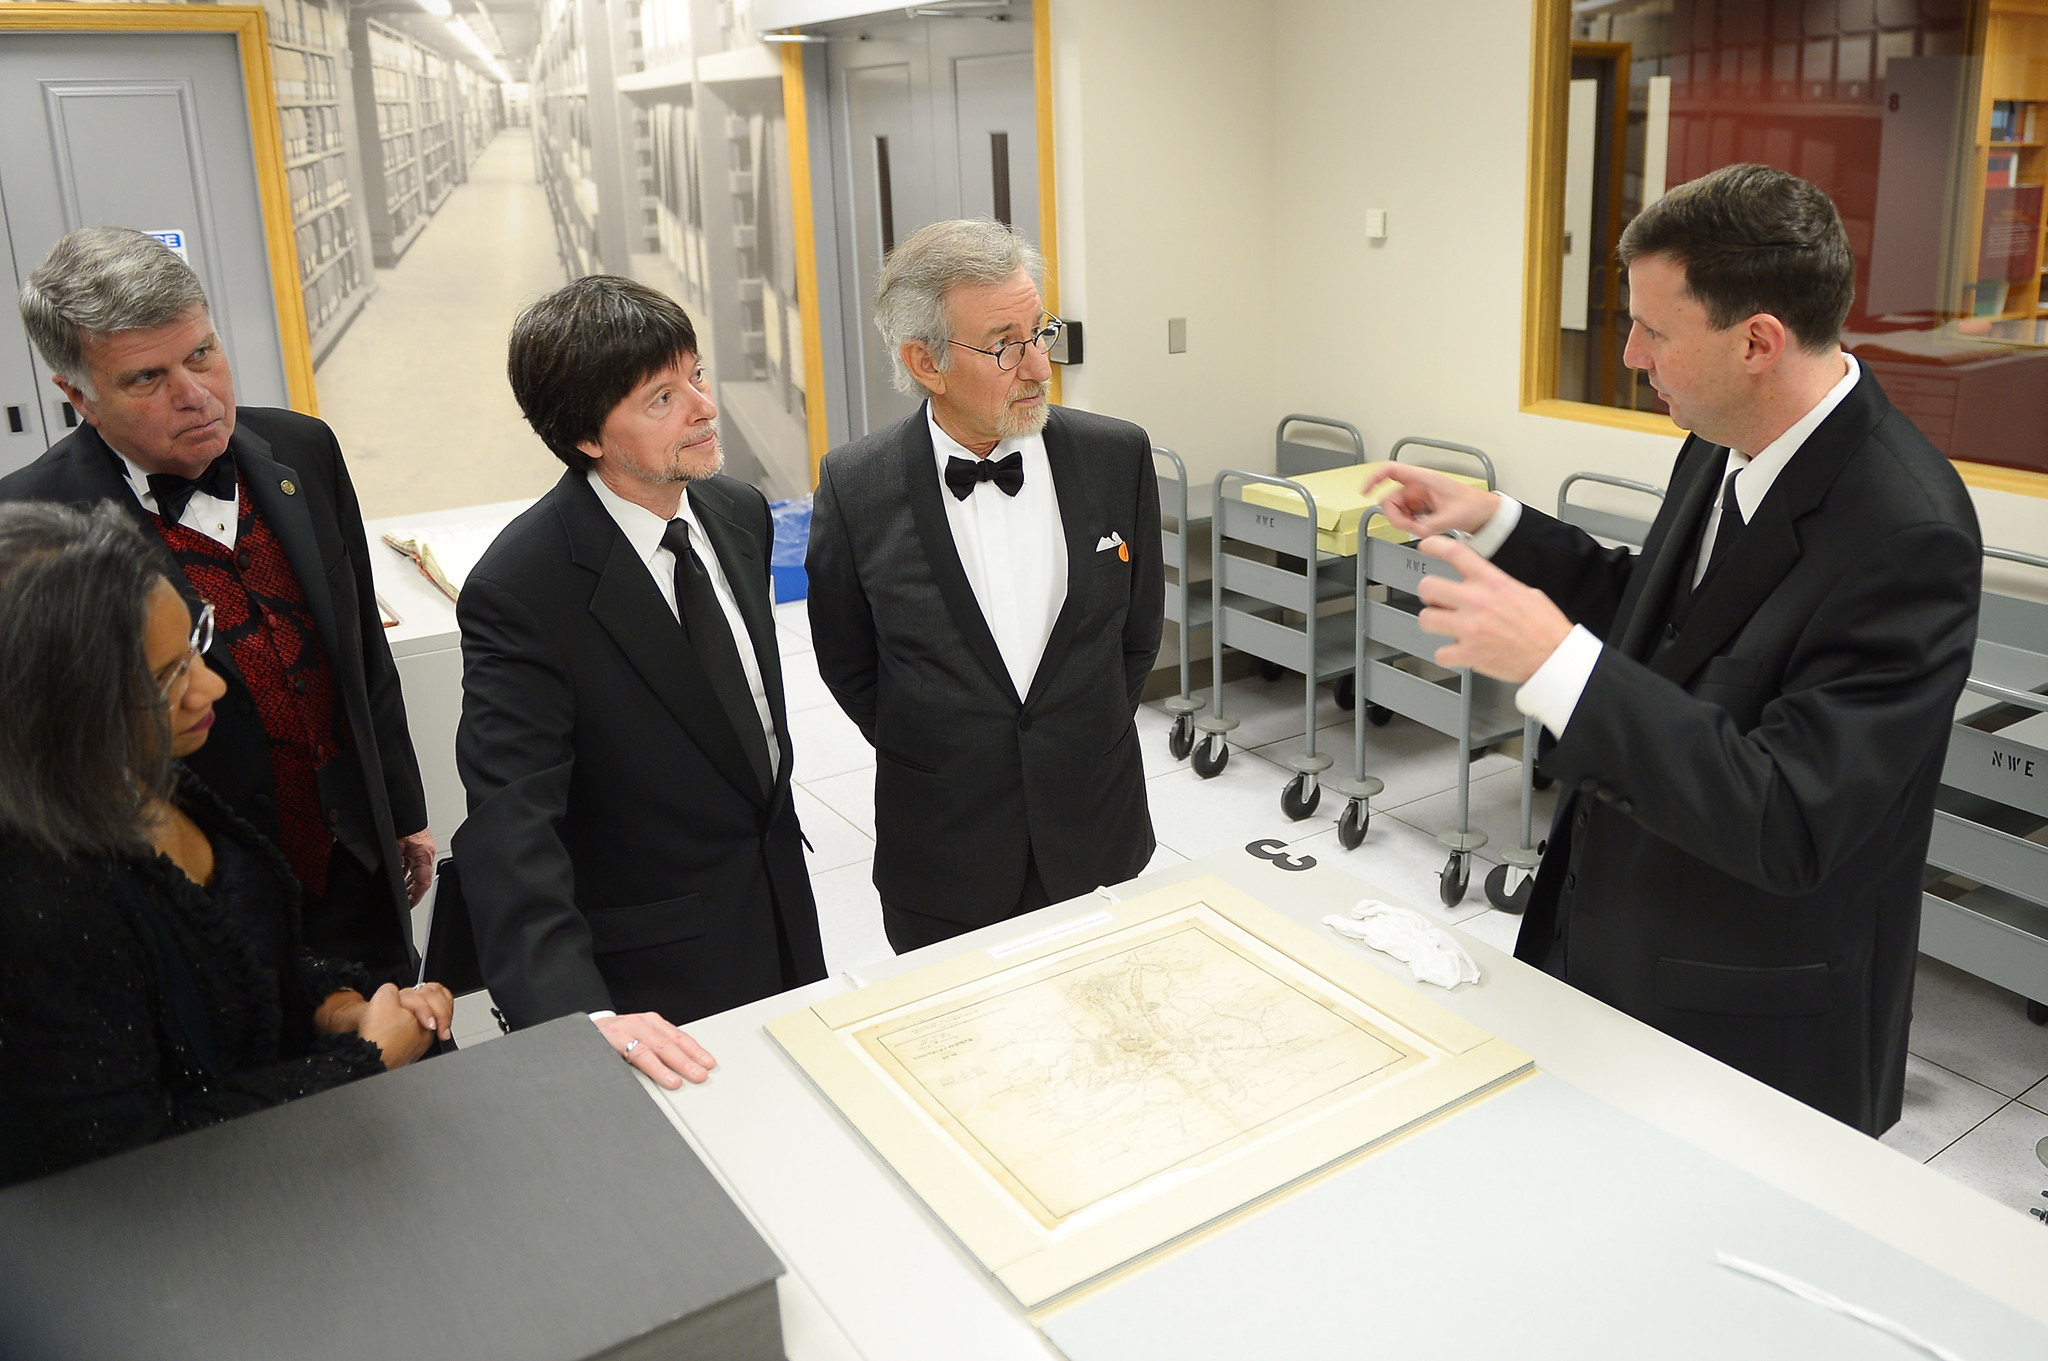 Foundation for the National Archives Chair and President A'Lelia Bundles, Archivist of the United States The Honorable David S. Ferriero, Foundation for the National Archives Board Vice President and Gala Chair Ken Burns, filmmaker and honoree Steven Spielberg, and archivist Trevor Plante view the 13th Amendment to the Constitution at the Foundation for the National Archives 2013 Records of Achievement award ceremony and gala in honor of Steven Spielberg on November 19, 2013 in Washington, D.C.